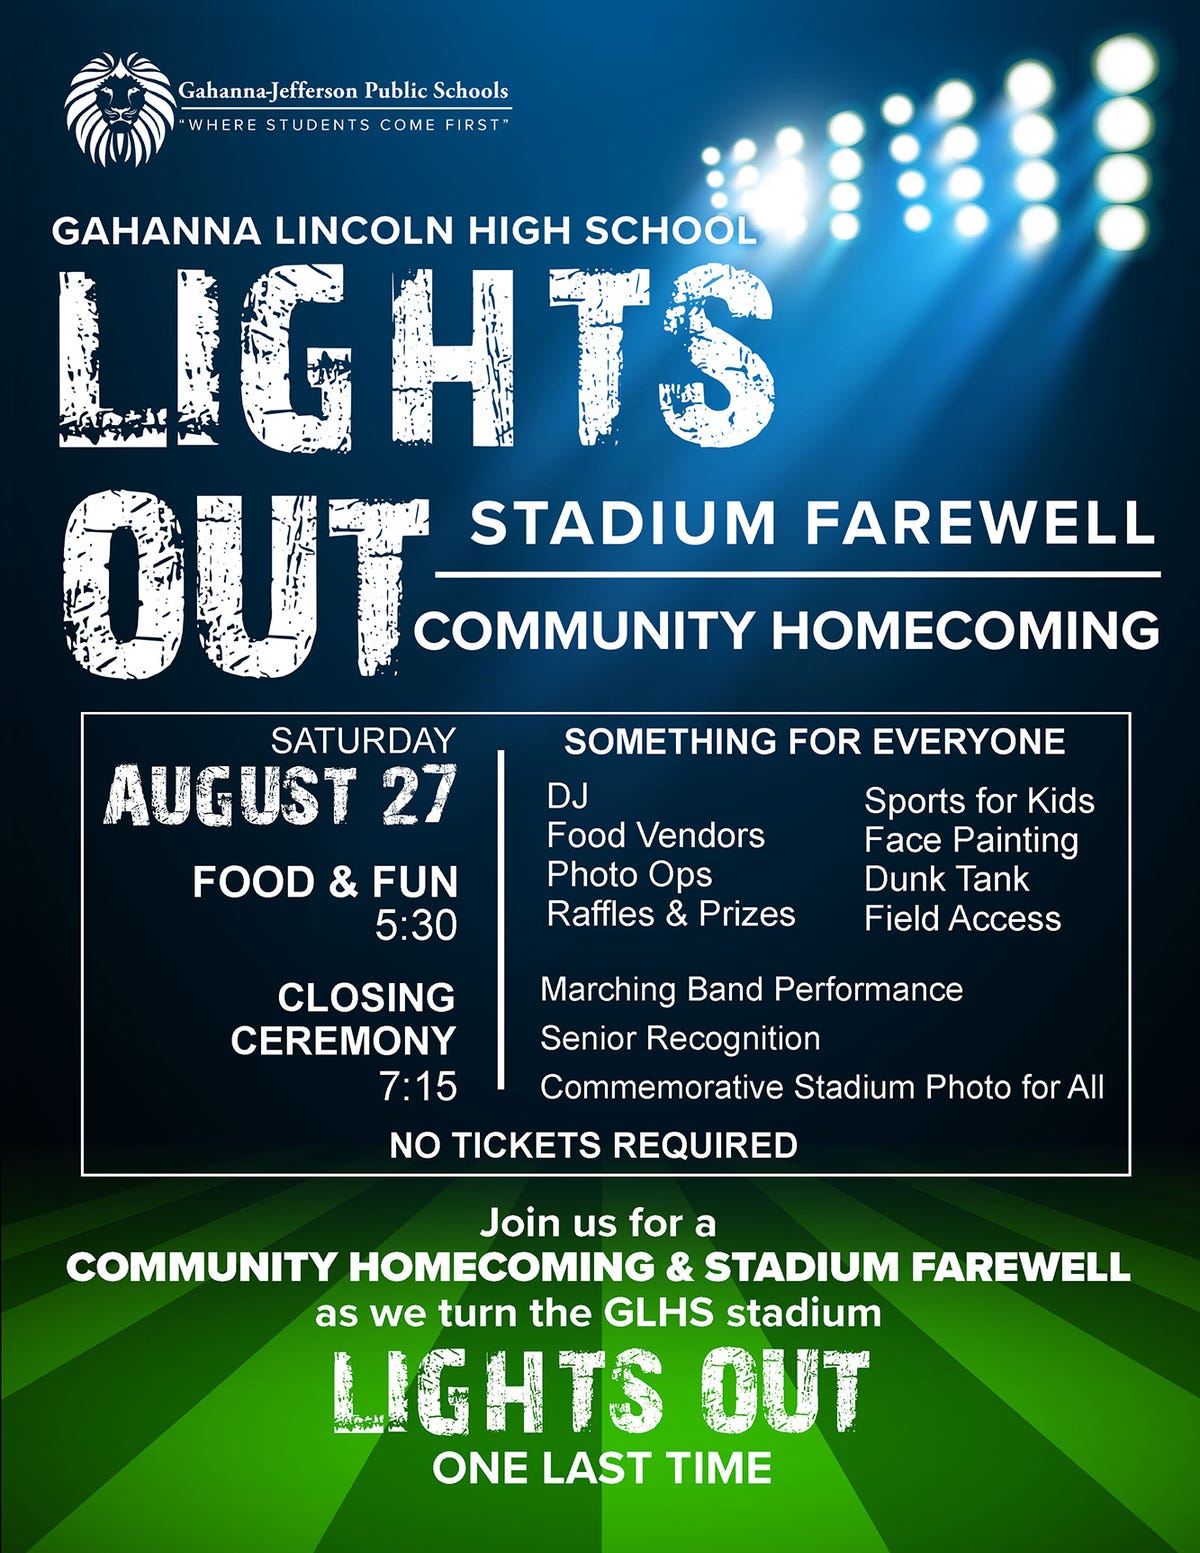 flertal barriere Mejeriprodukter Gahanna Lincoln: Say farewell to stadium before Lights Out